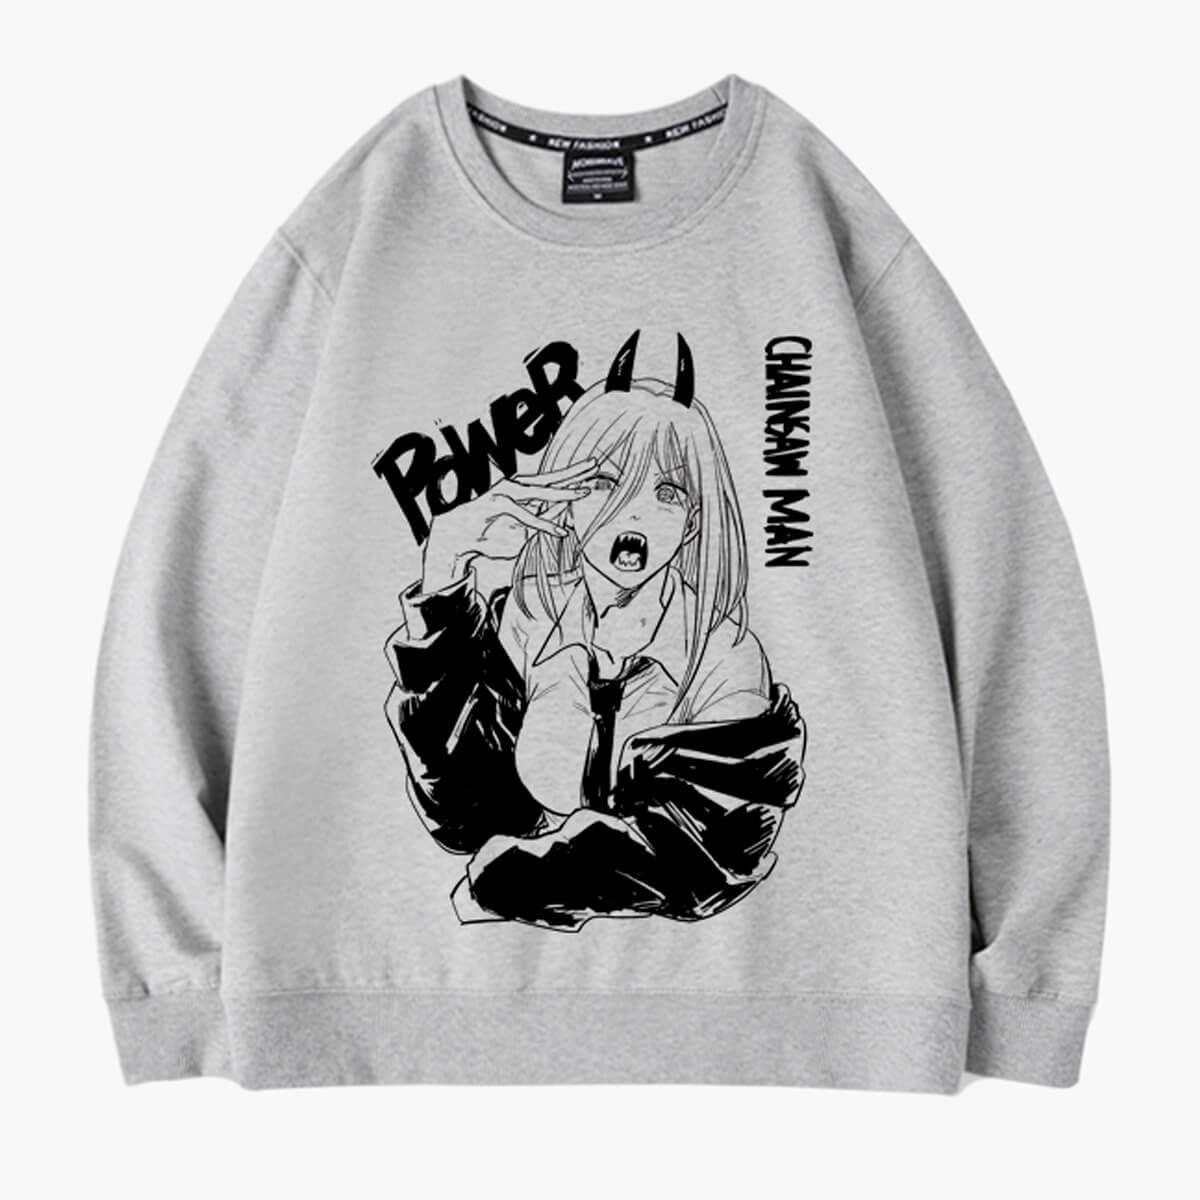 Annoyed Power Chainsaw Man Sweatshirt - Aesthetic Clothes Shop